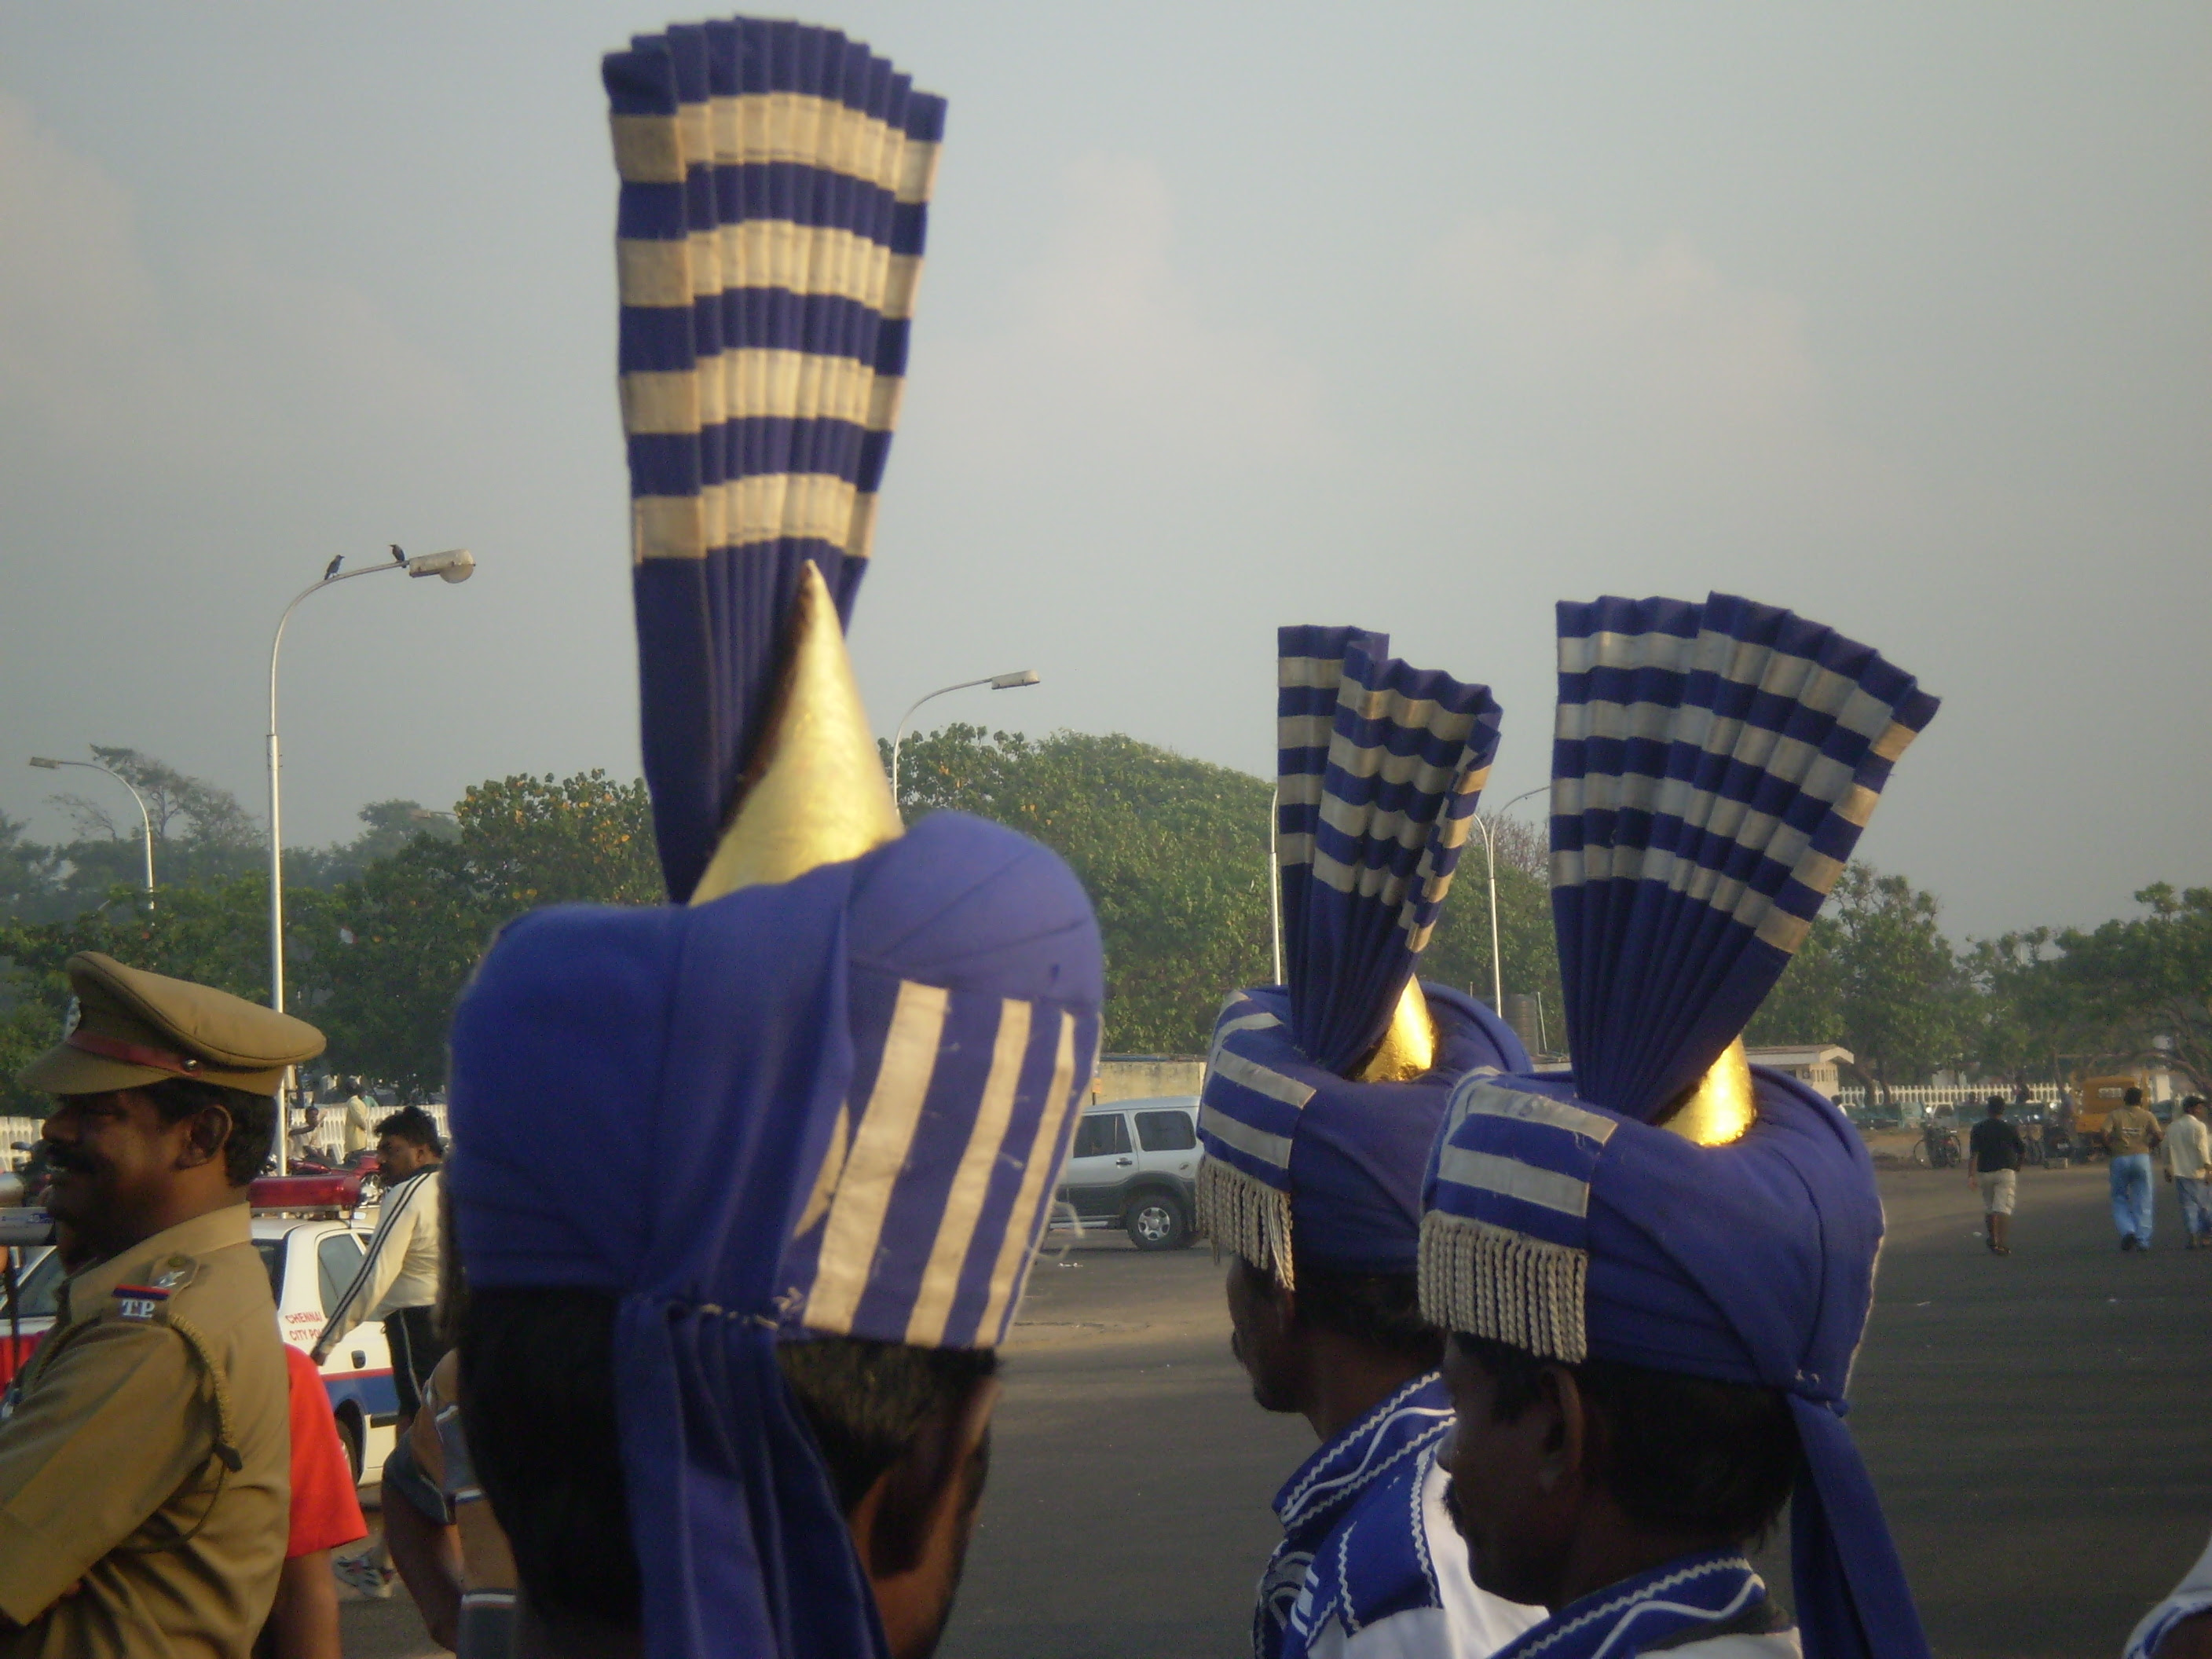 hats of Music Band